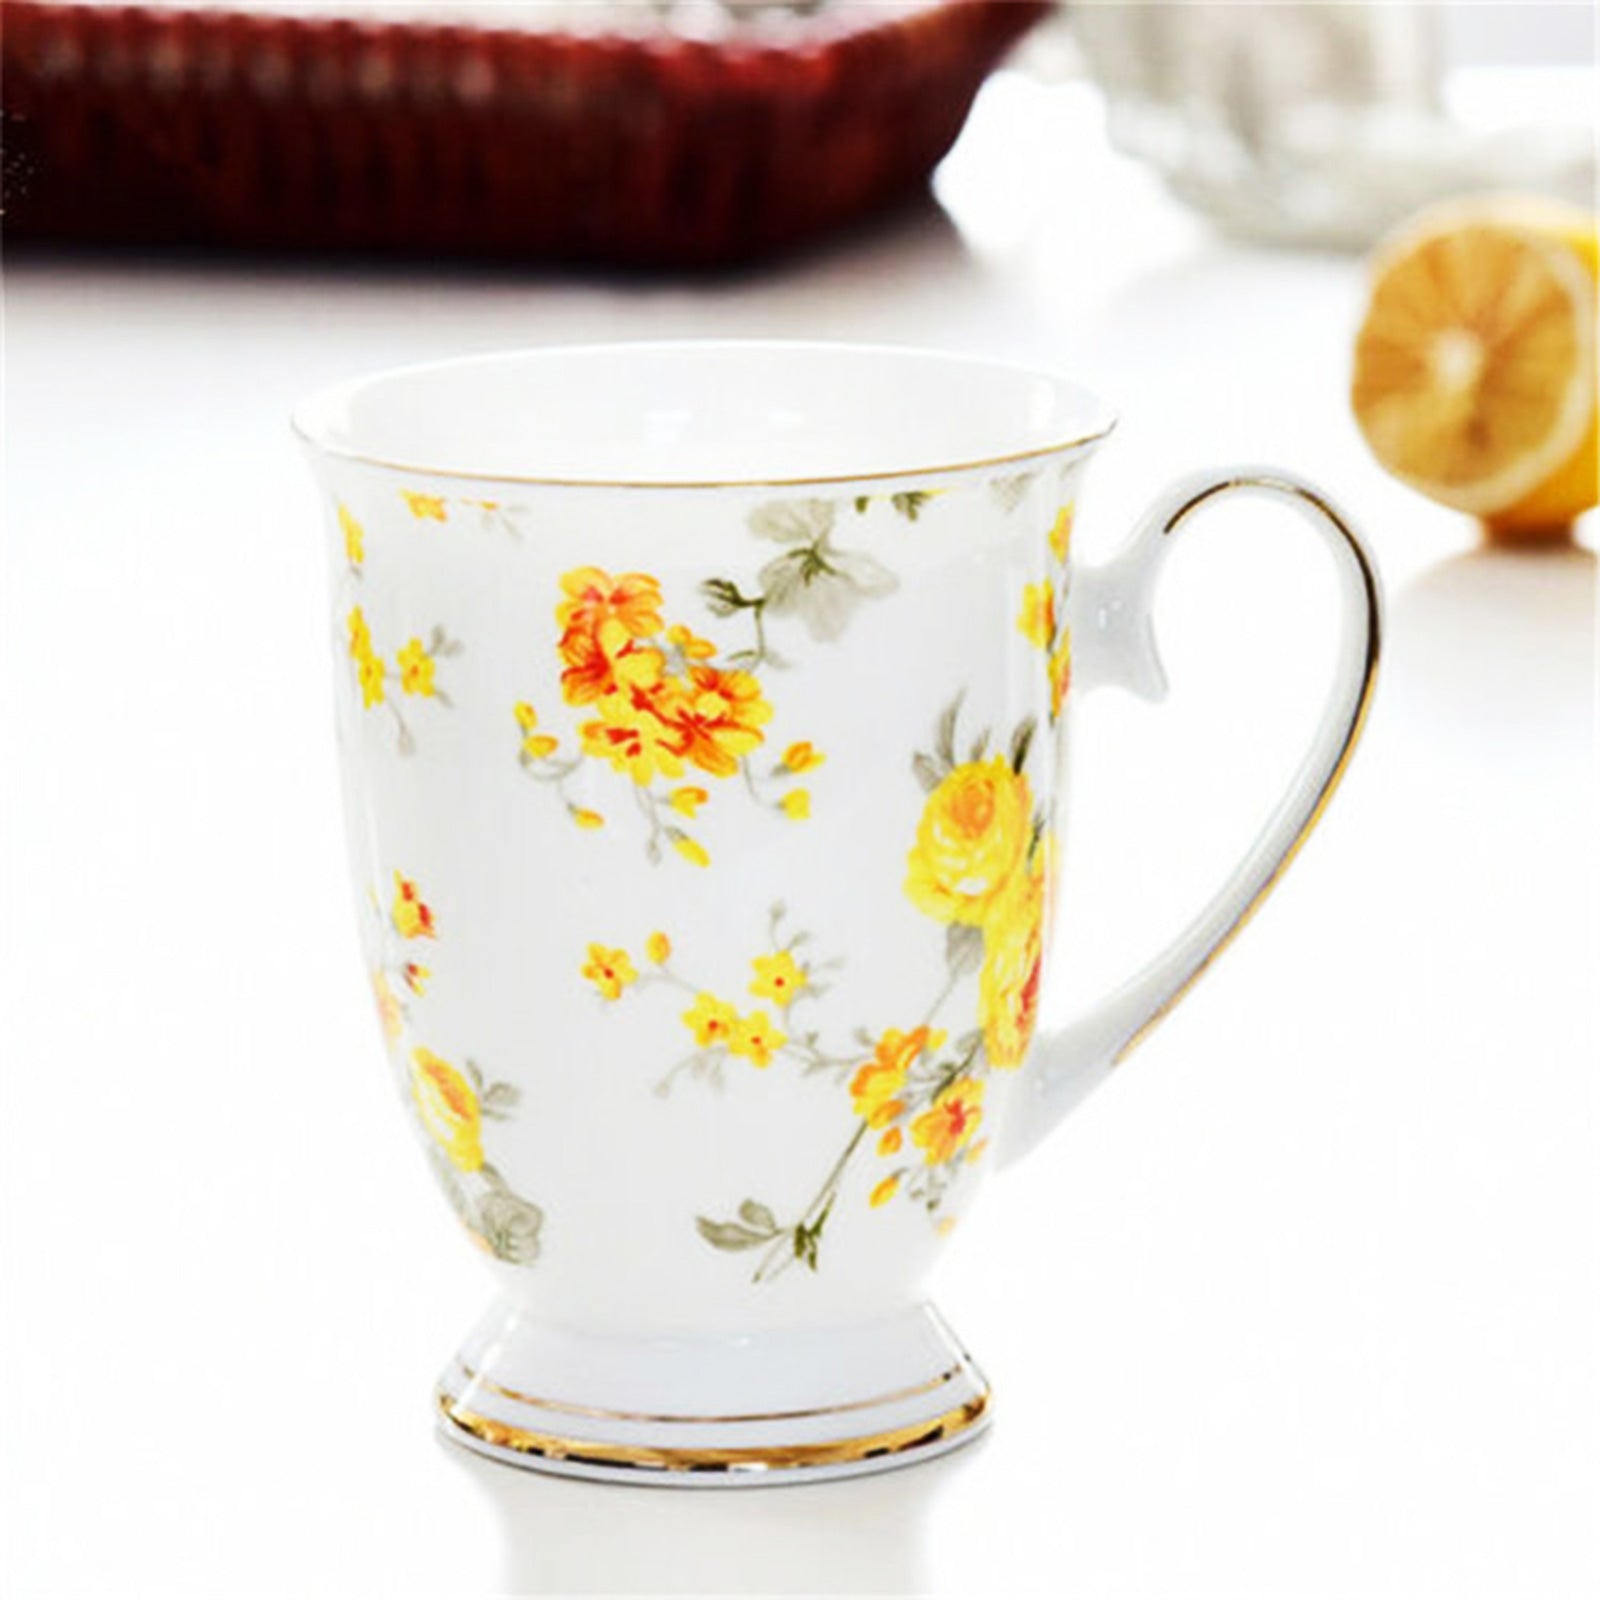 Classic Elegance: Porcelain Mugs with Stunning Hand-Drawn Floral Designs